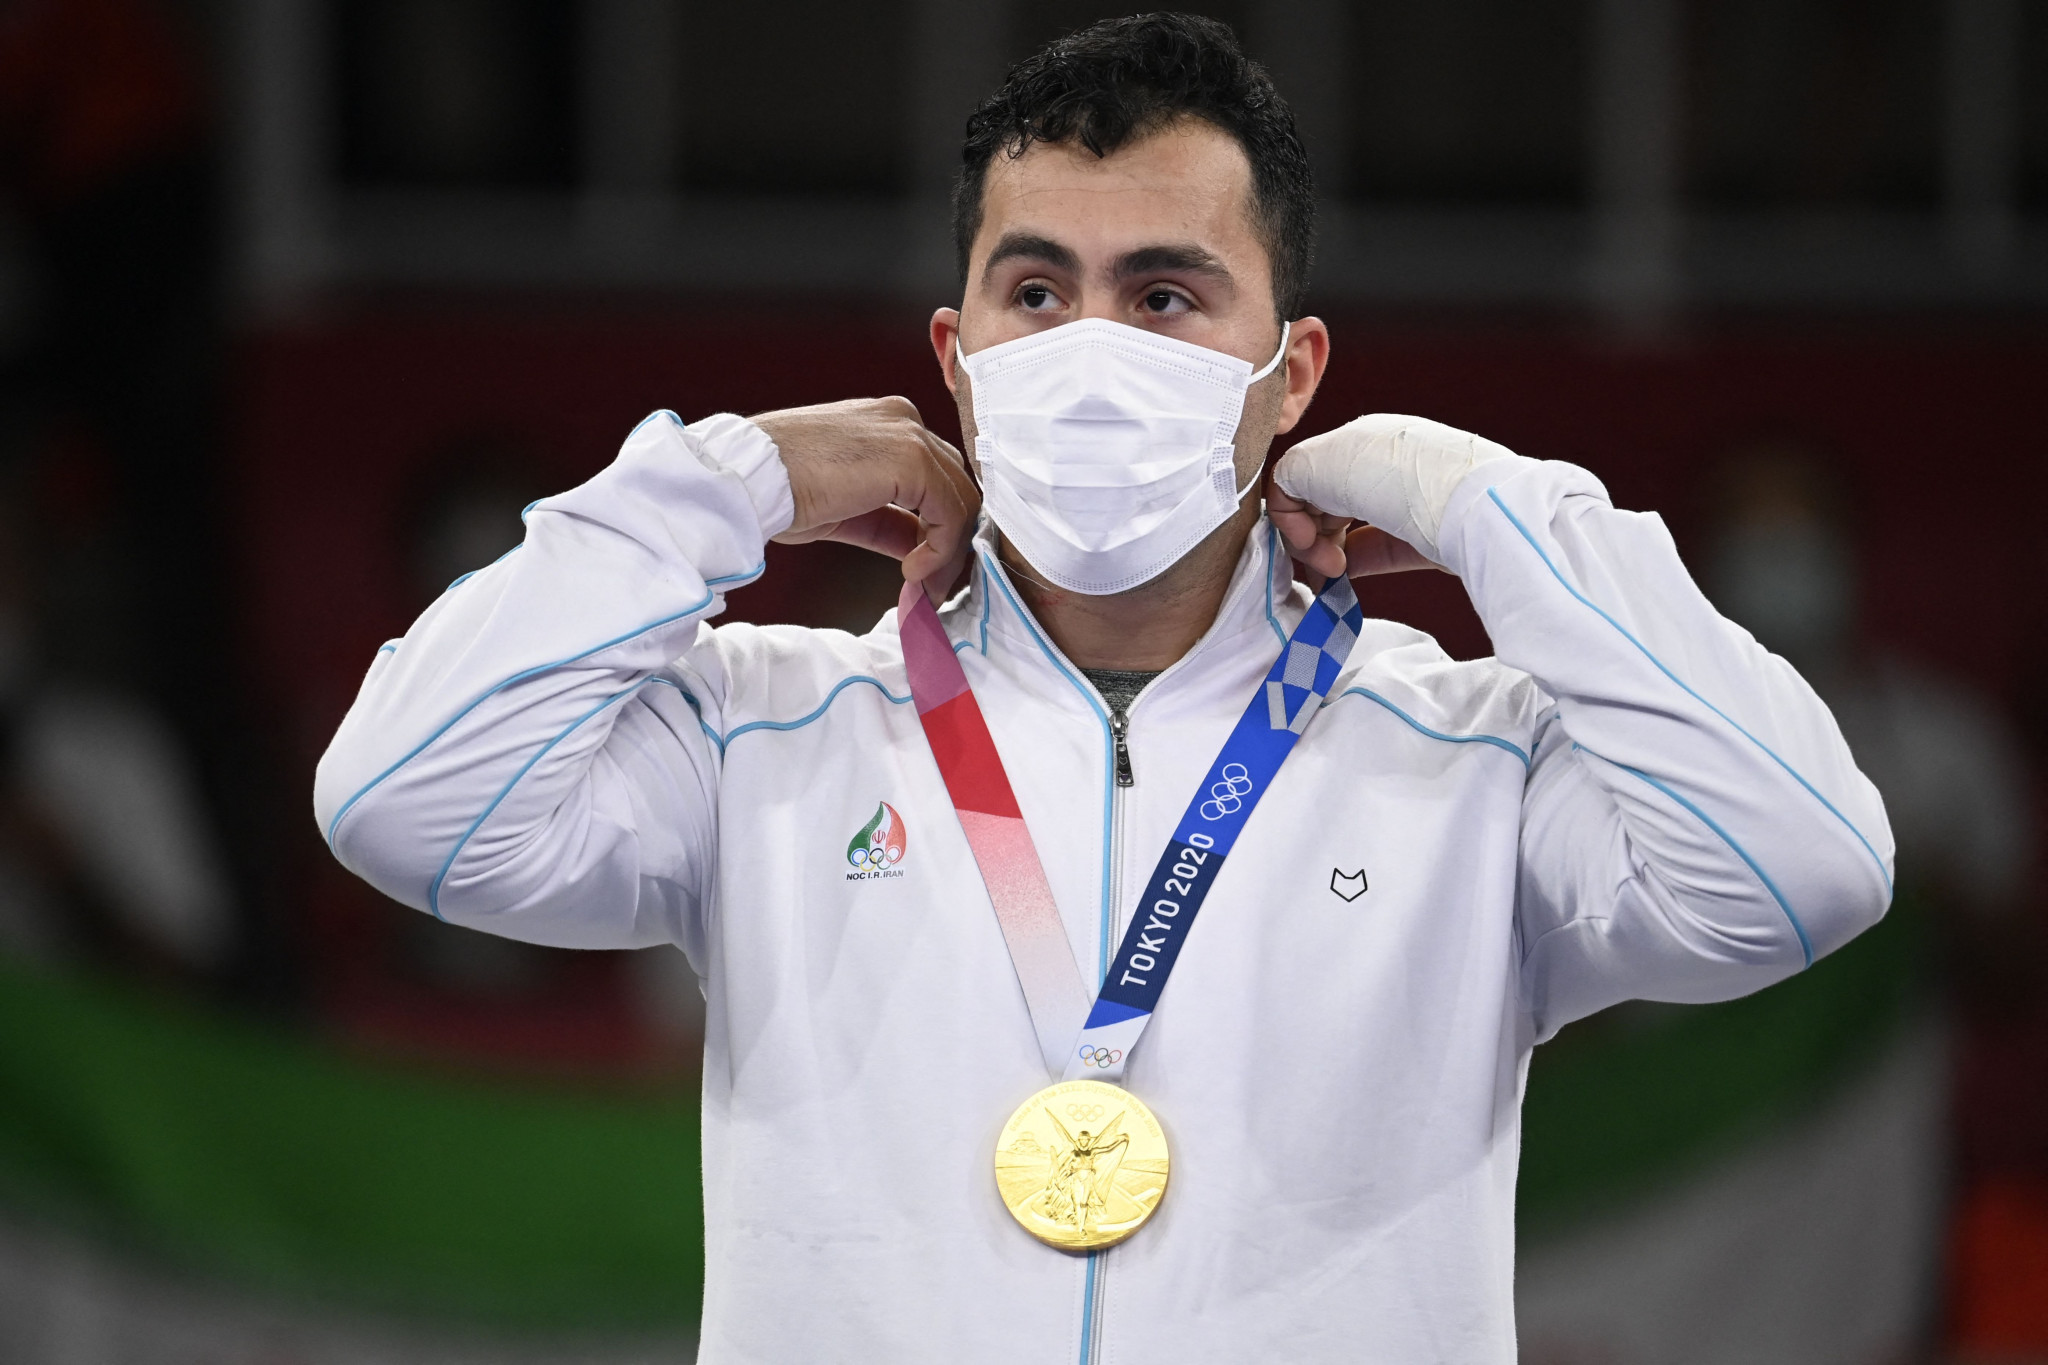 Sajjad Ganjzadeh has publicly criticised Iran's policy of stopping Iranians from competing against Israelis ©Getty Images